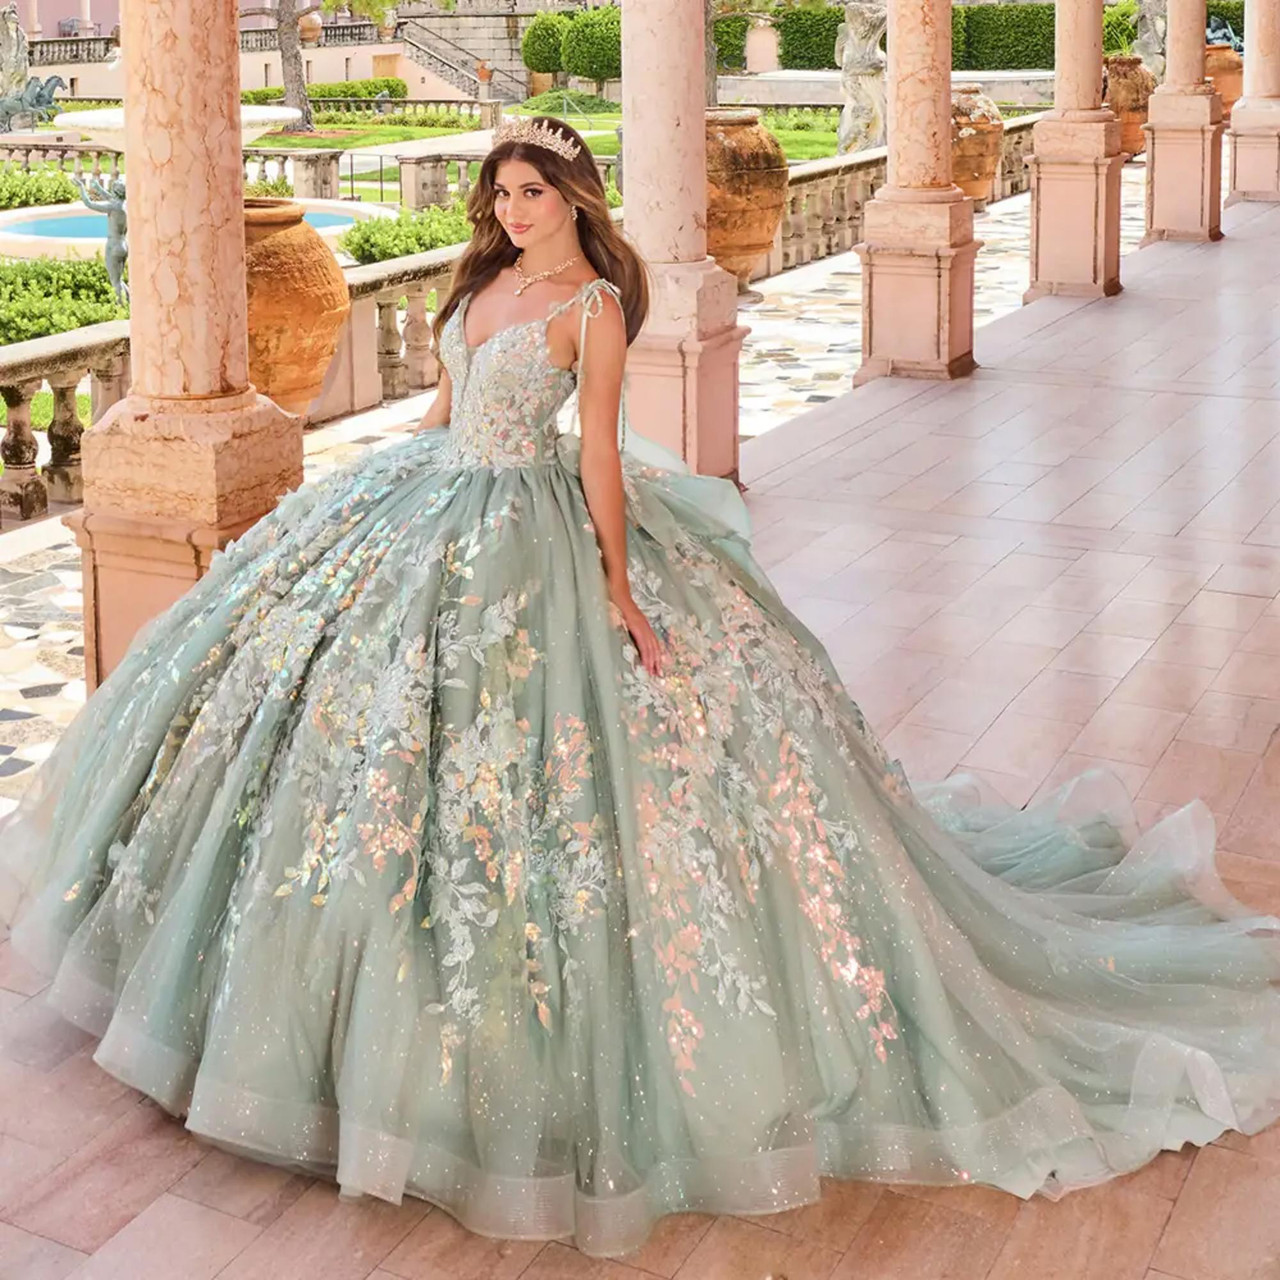 Princesa by Ariana Vara PR30157 Lace Glitter Tulle Gown